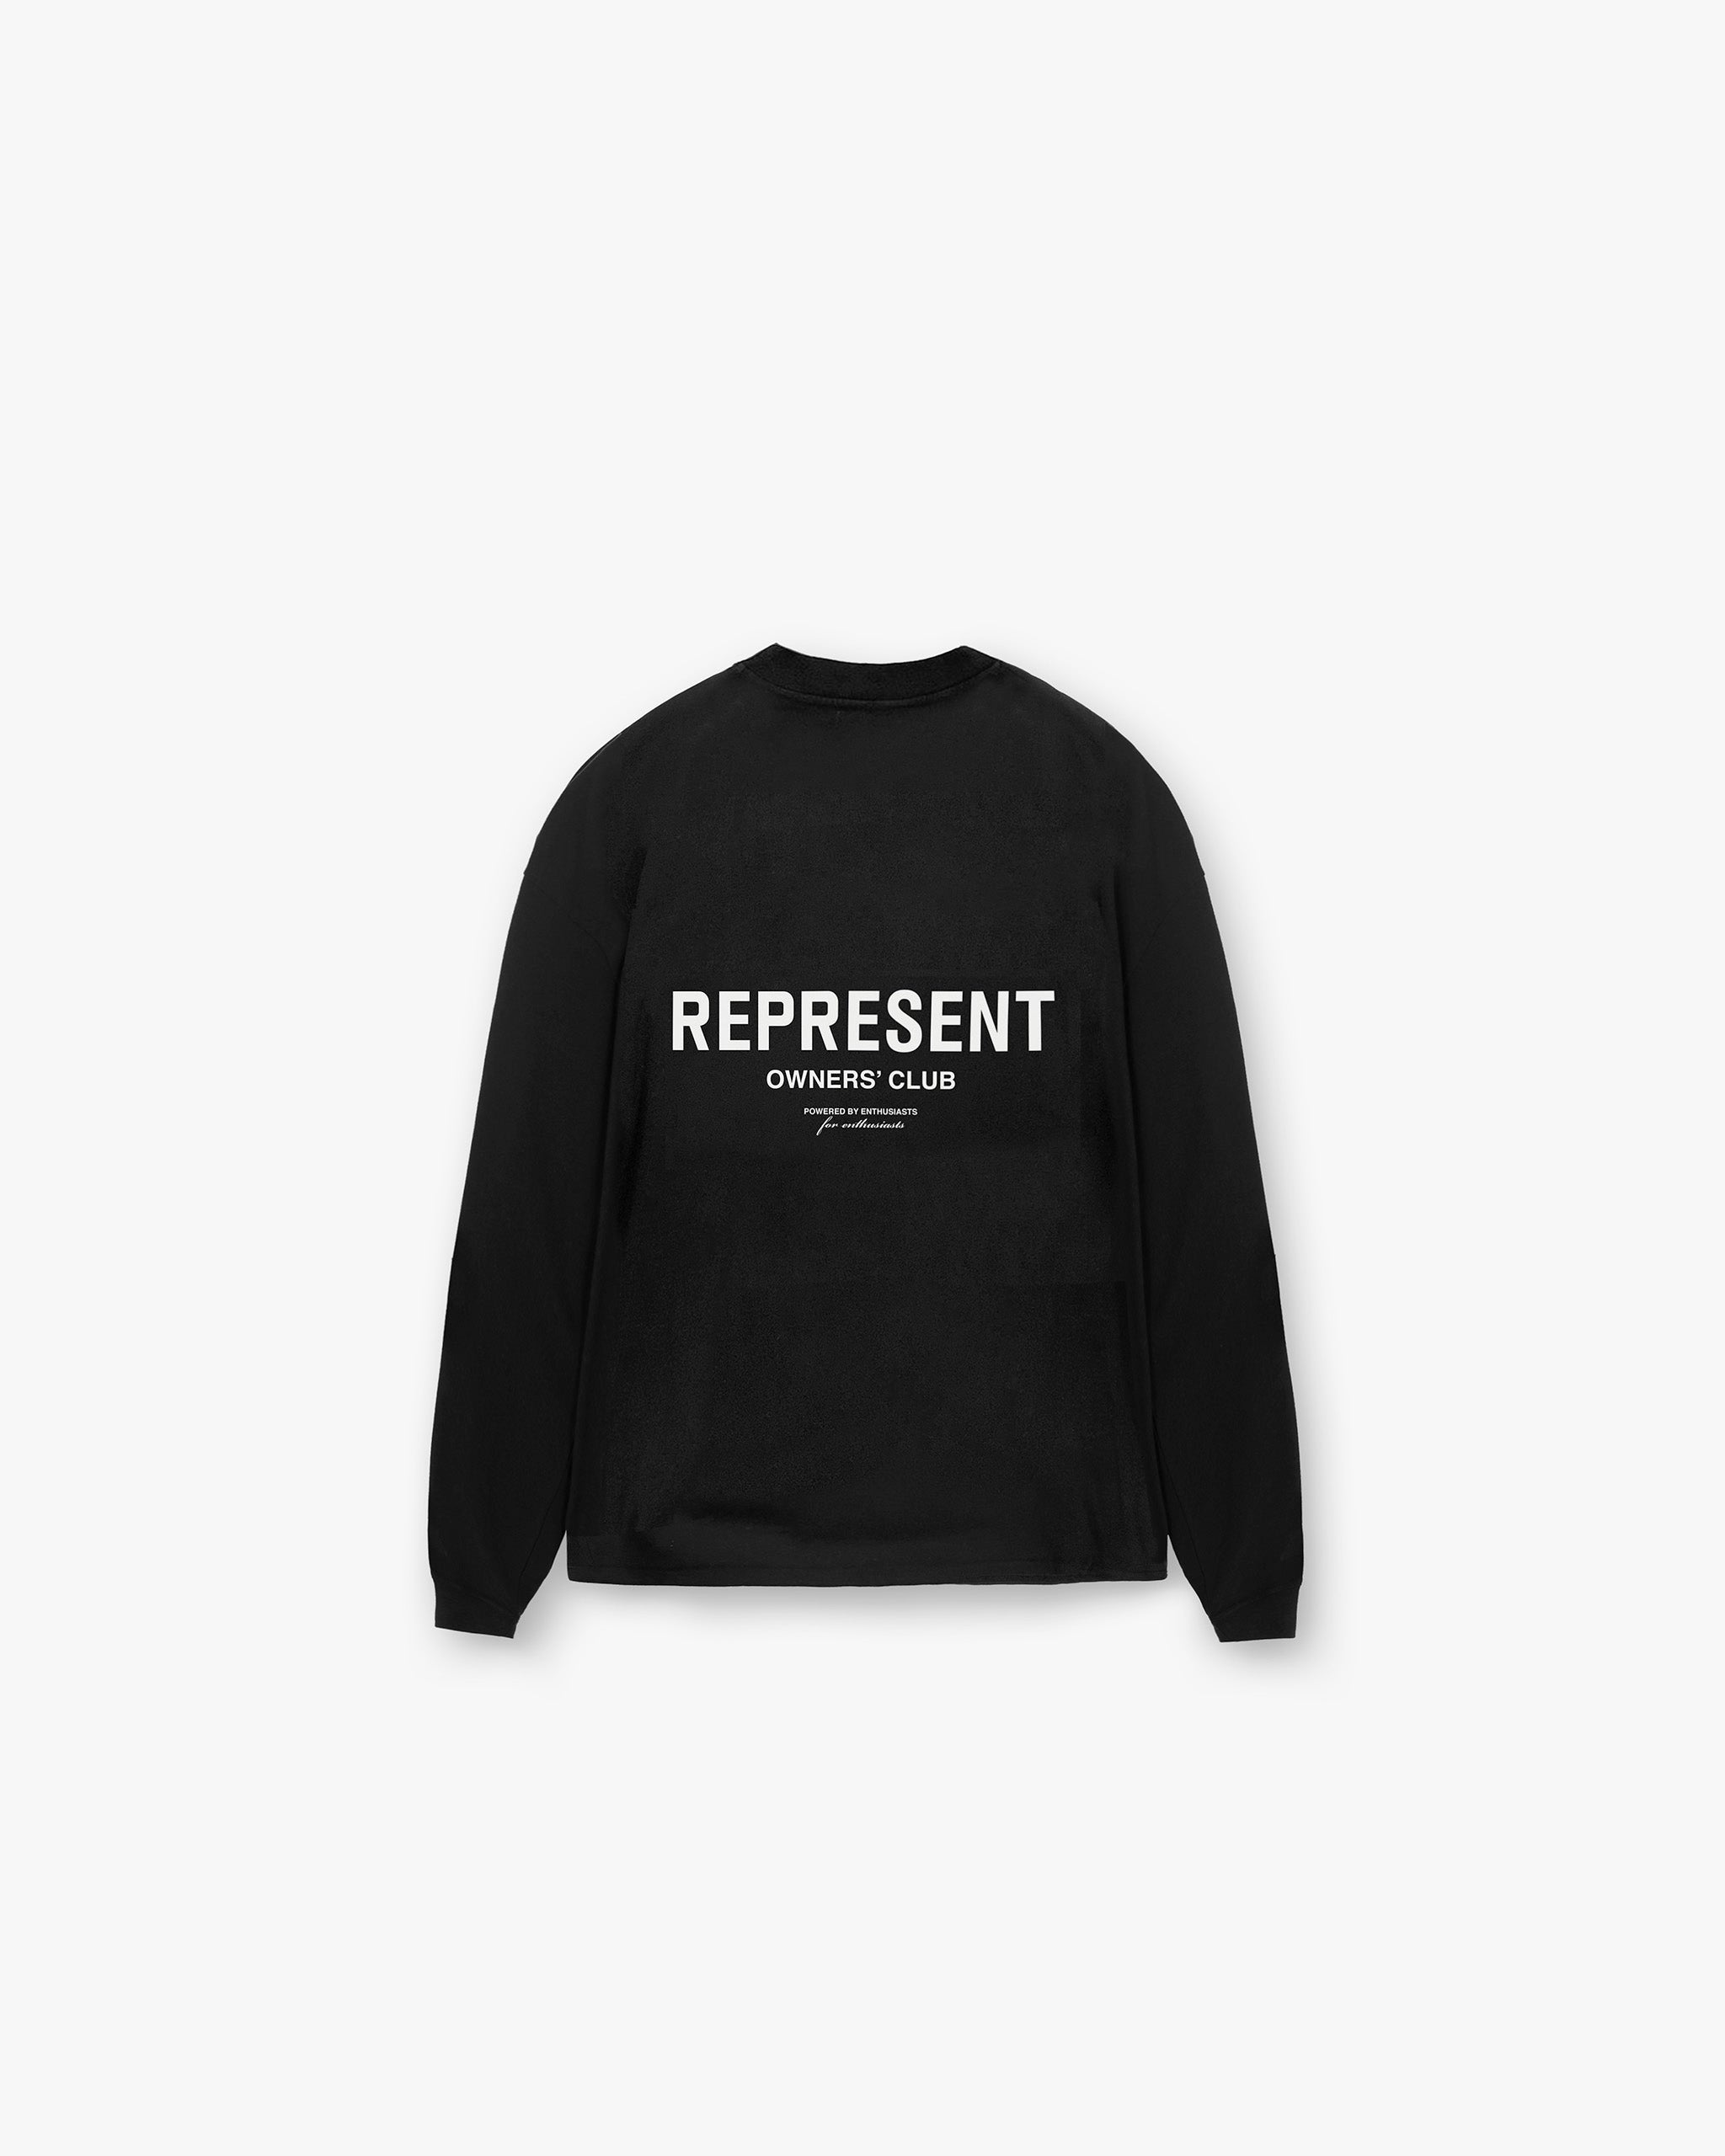 Owners Club | REPRESENT CLO